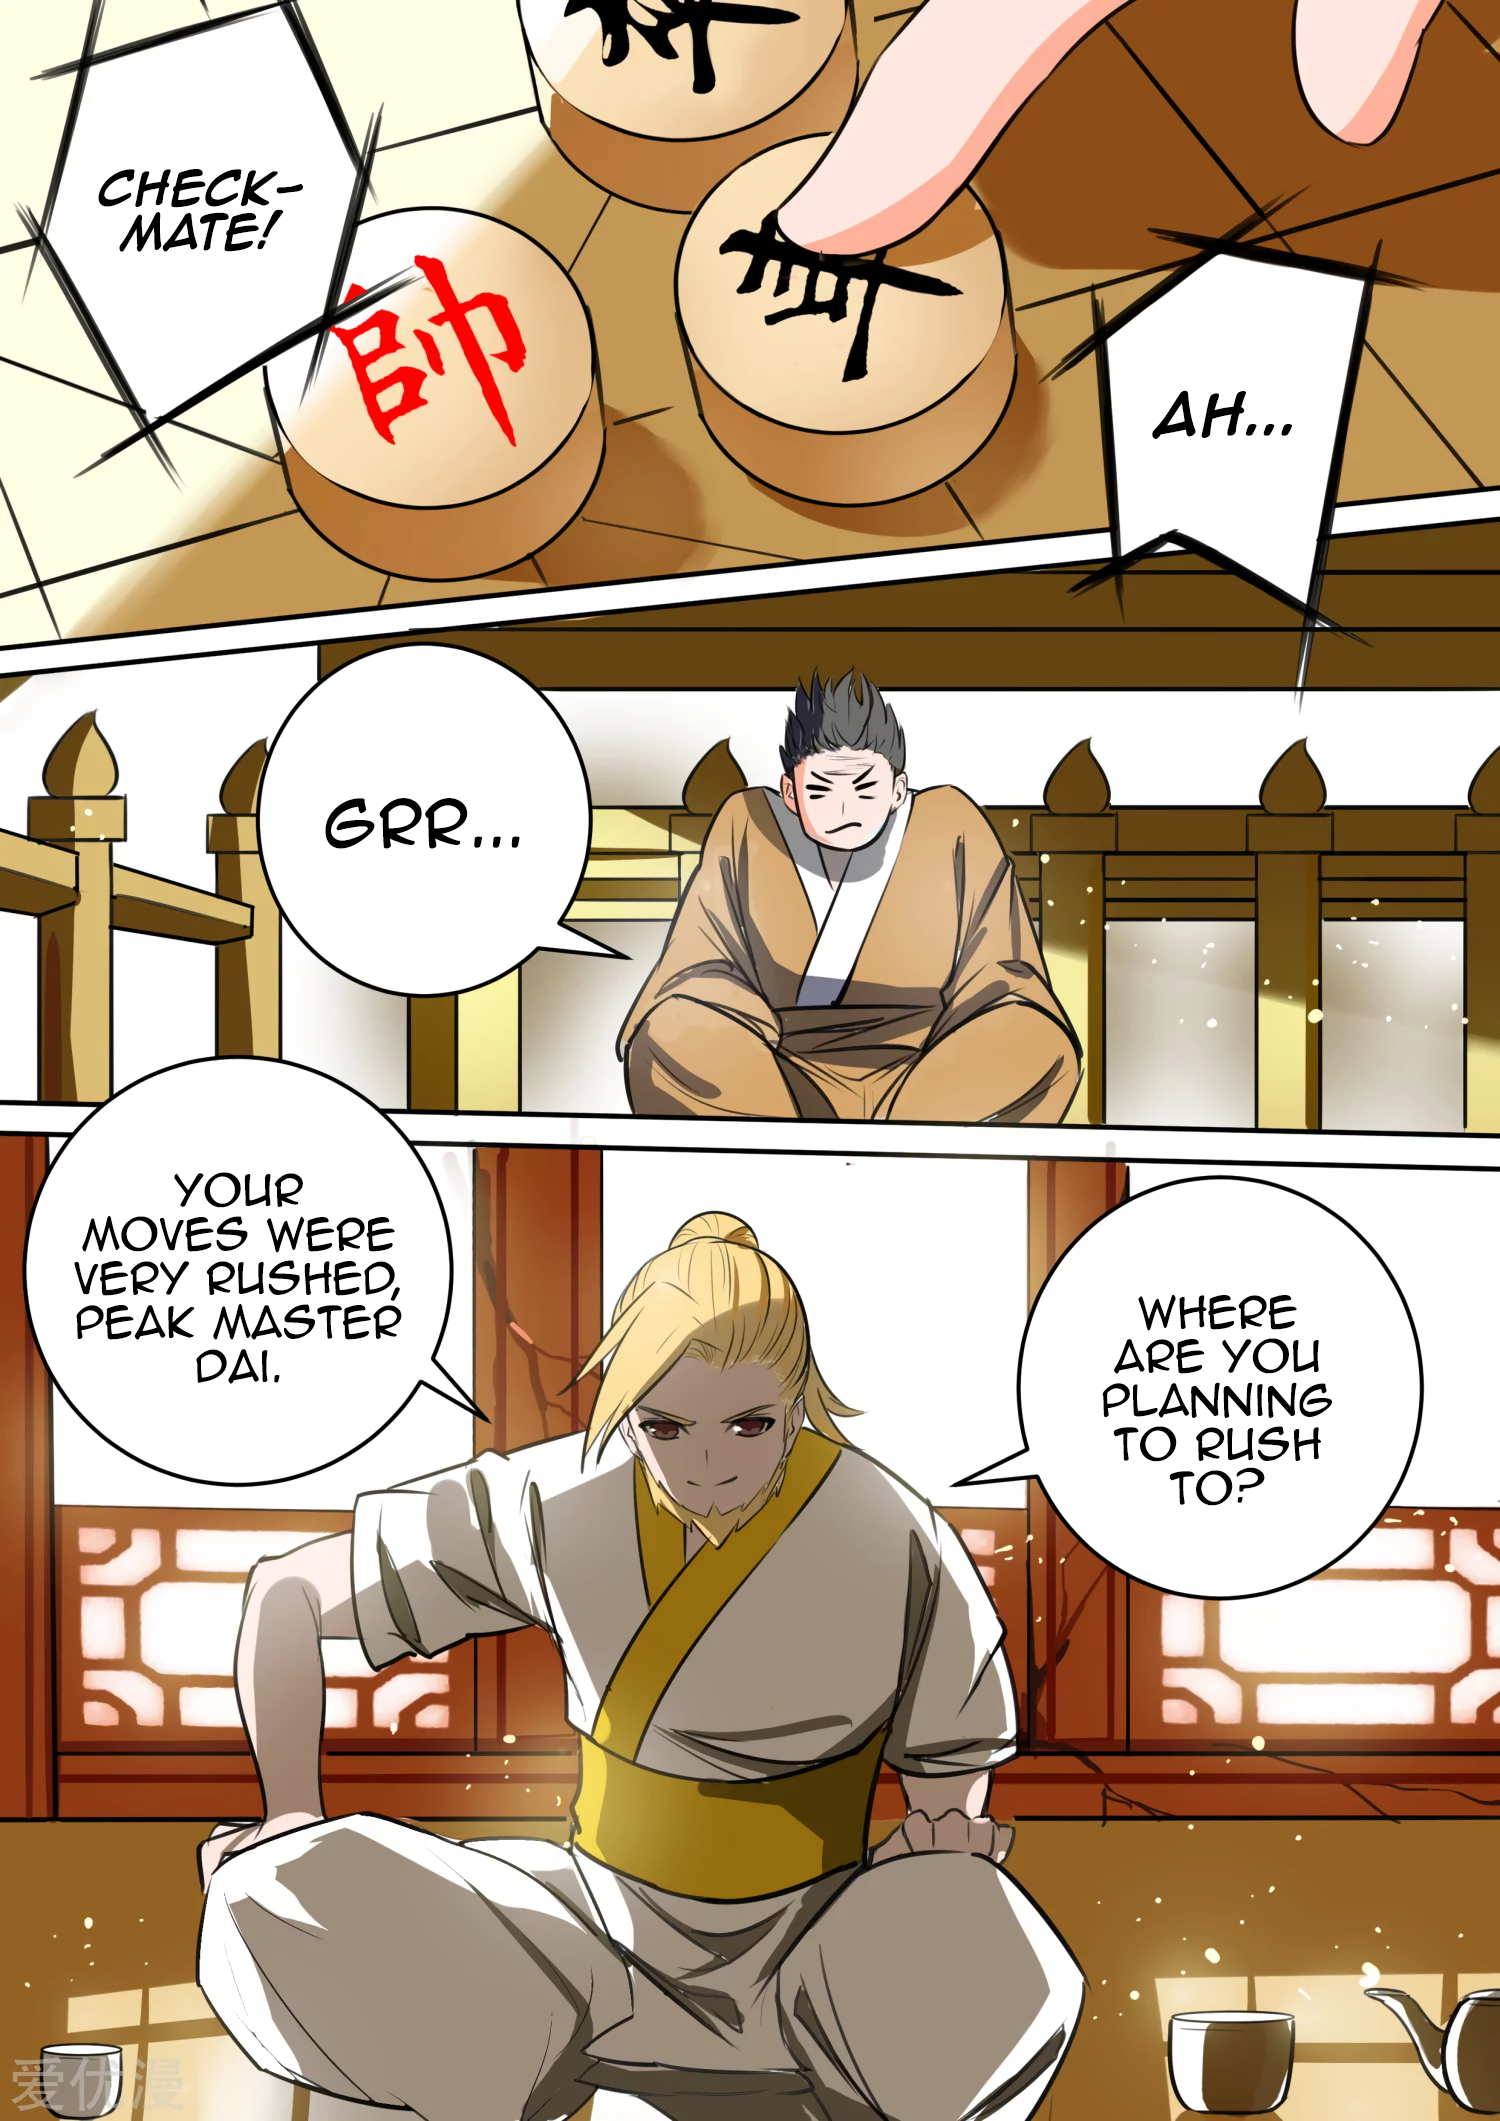 Ten Thousand Paths To Becoming A God - Page 2